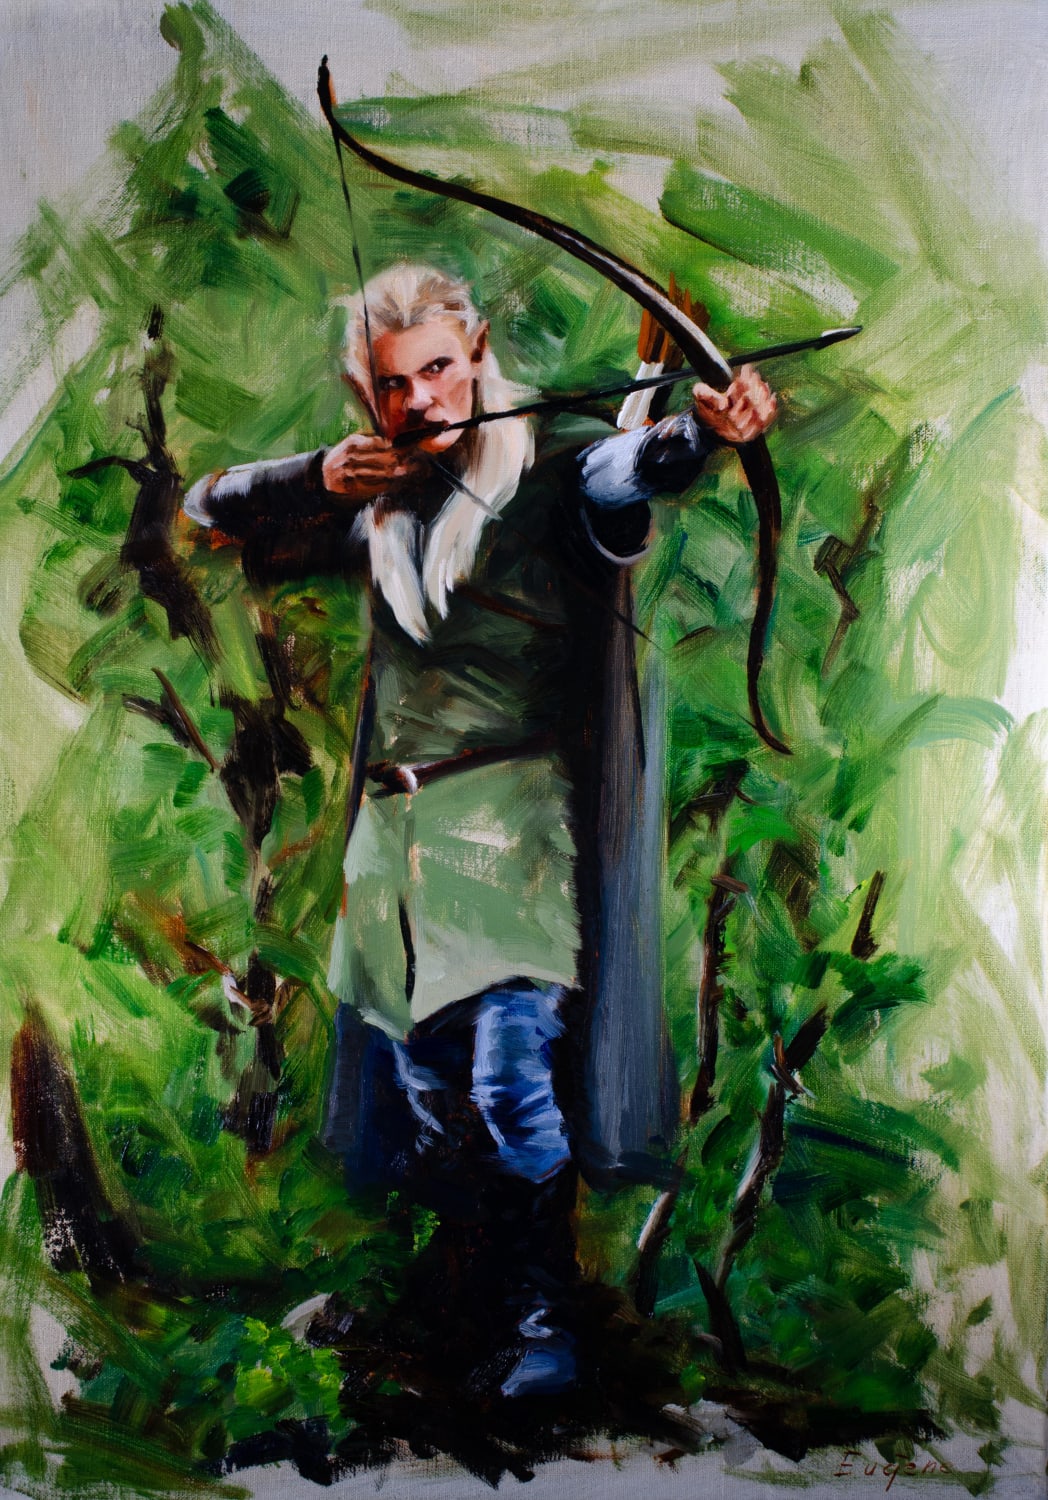 I painted Legolas from Lord of the rings with oil paint. Had a lot of fun !